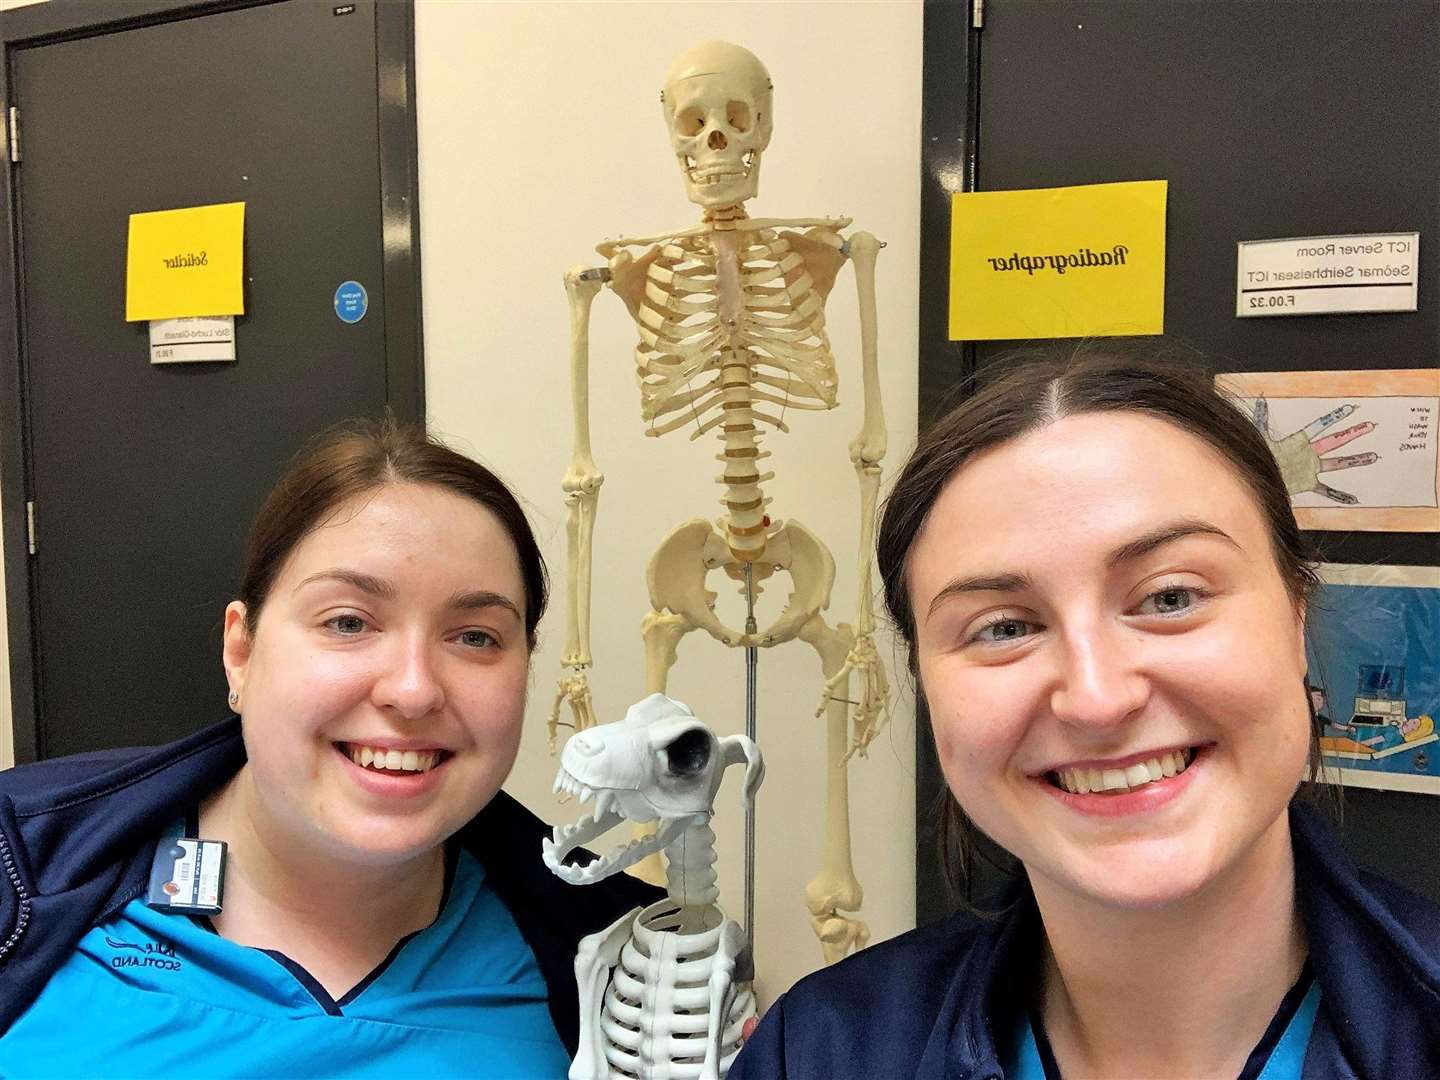 Aimee Calder, left, and Claire Risbridger spent time with Caithness pupils teaching them about the bones of the body.